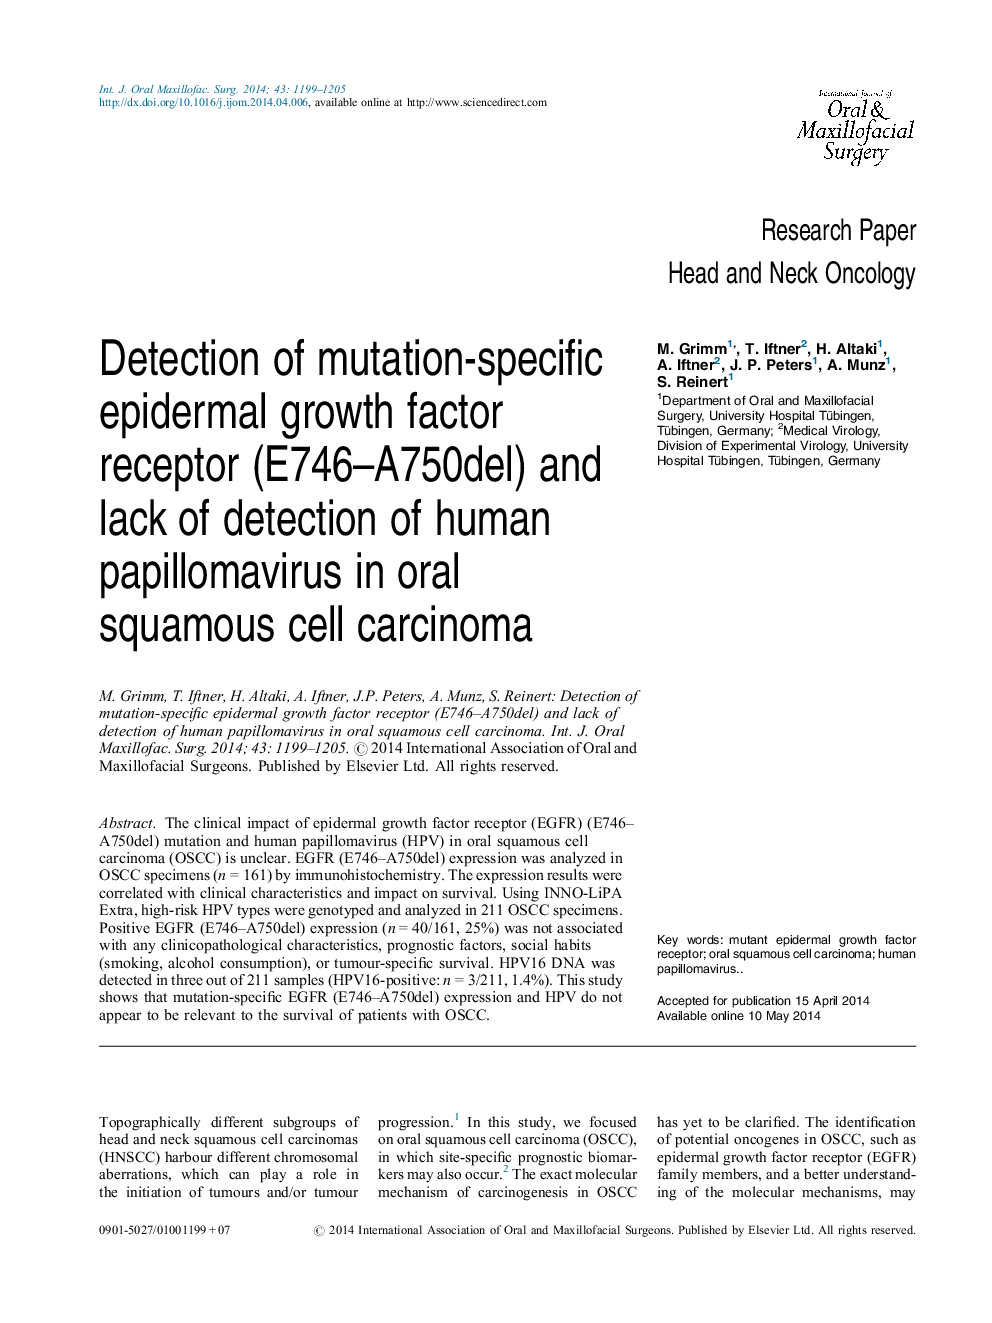 Research PaperHead and Neck OncologyDetection of mutation-specific epidermal growth factor receptor (E746-A750del) and lack of detection of human papillomavirus in oral squamous cell carcinoma